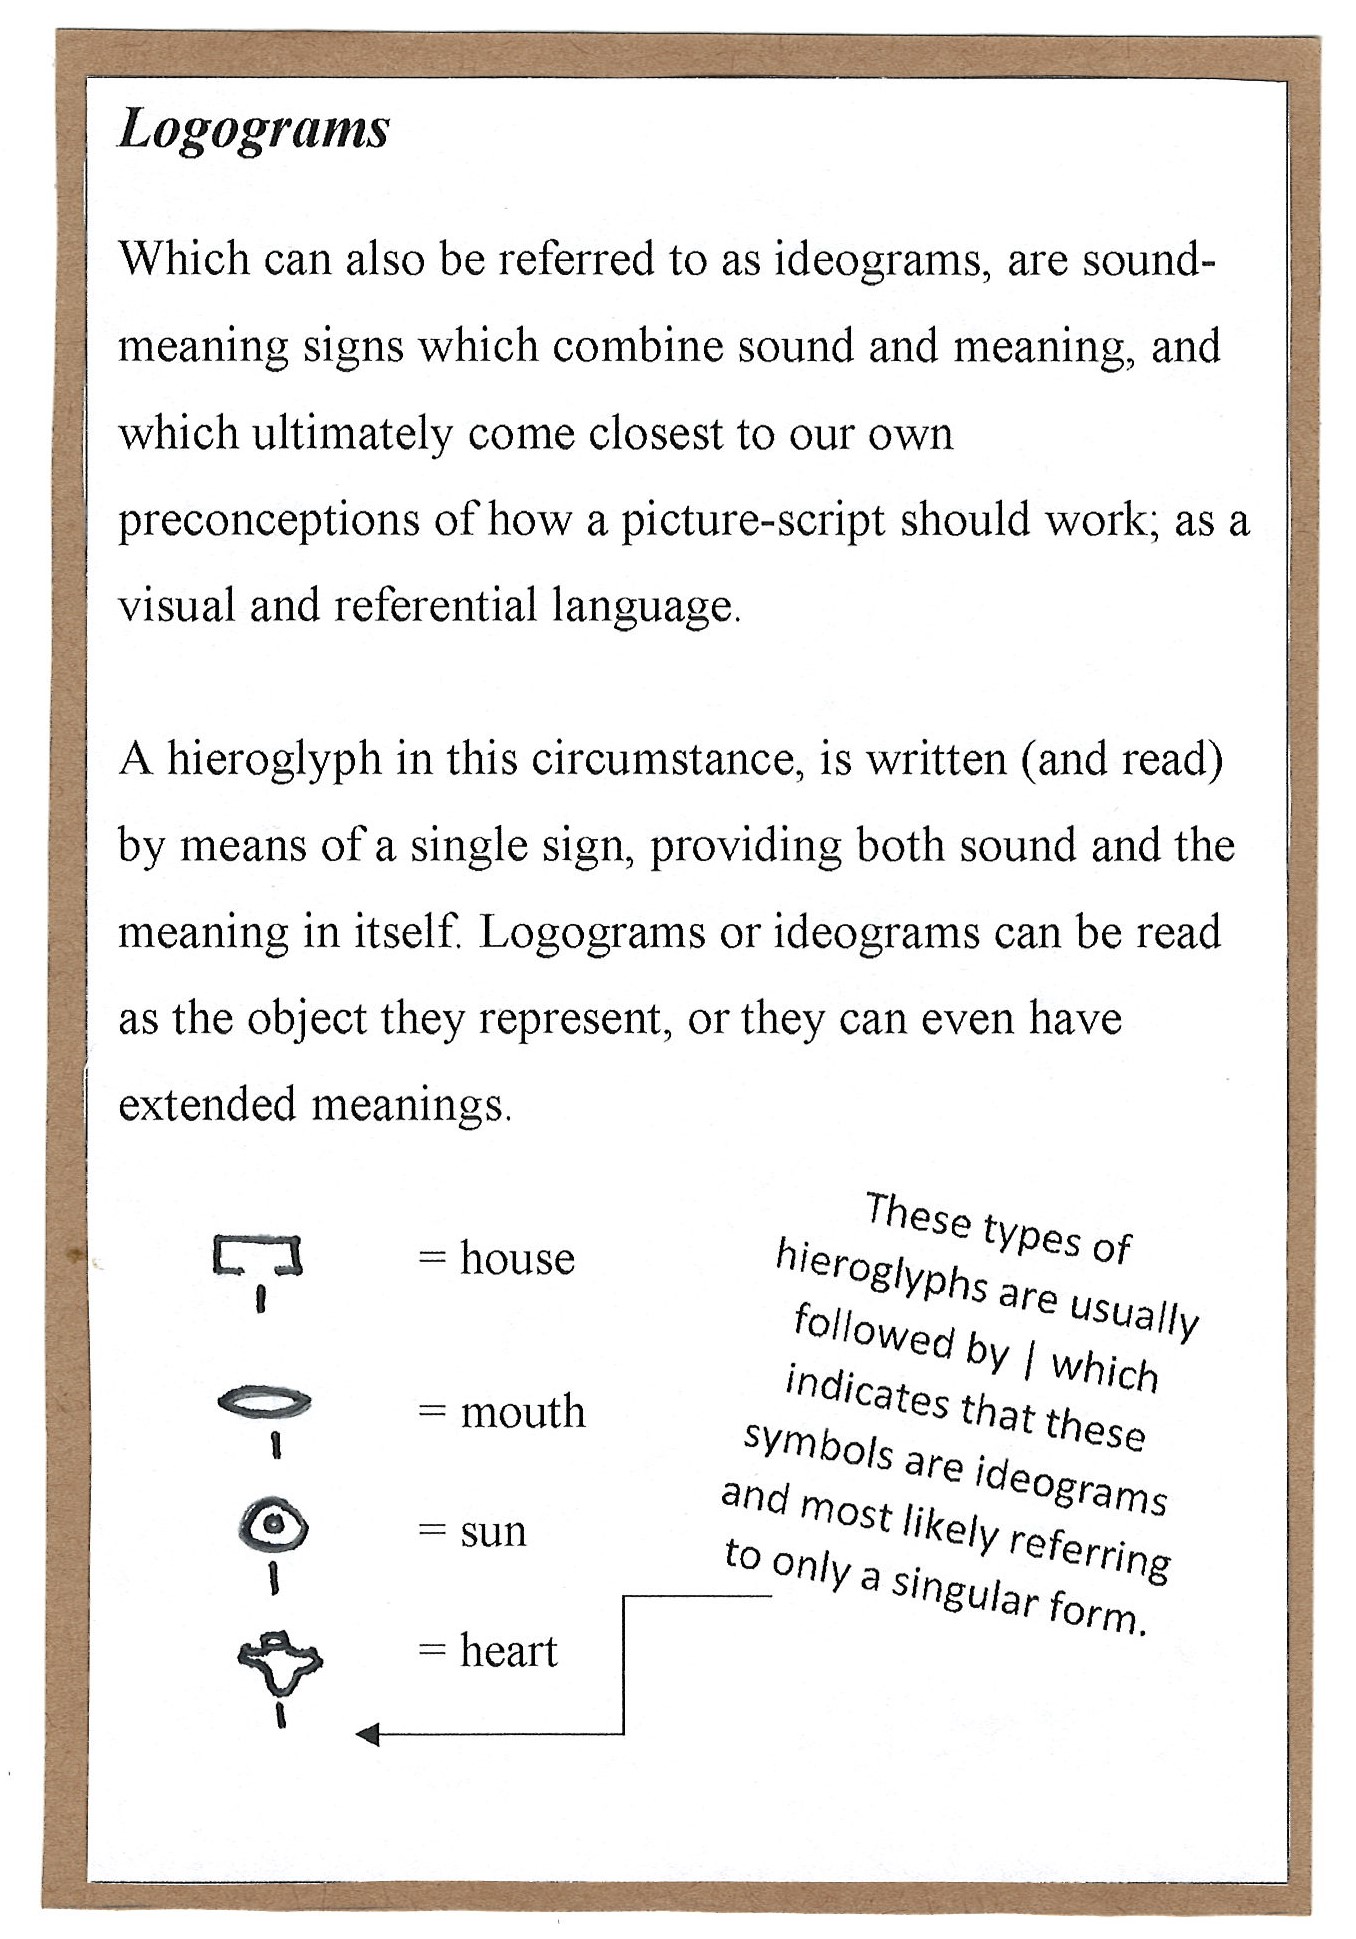 Page 2. Logograms, or ideograms and the ways in which pictures in the language can symbolize what they are a picture of.